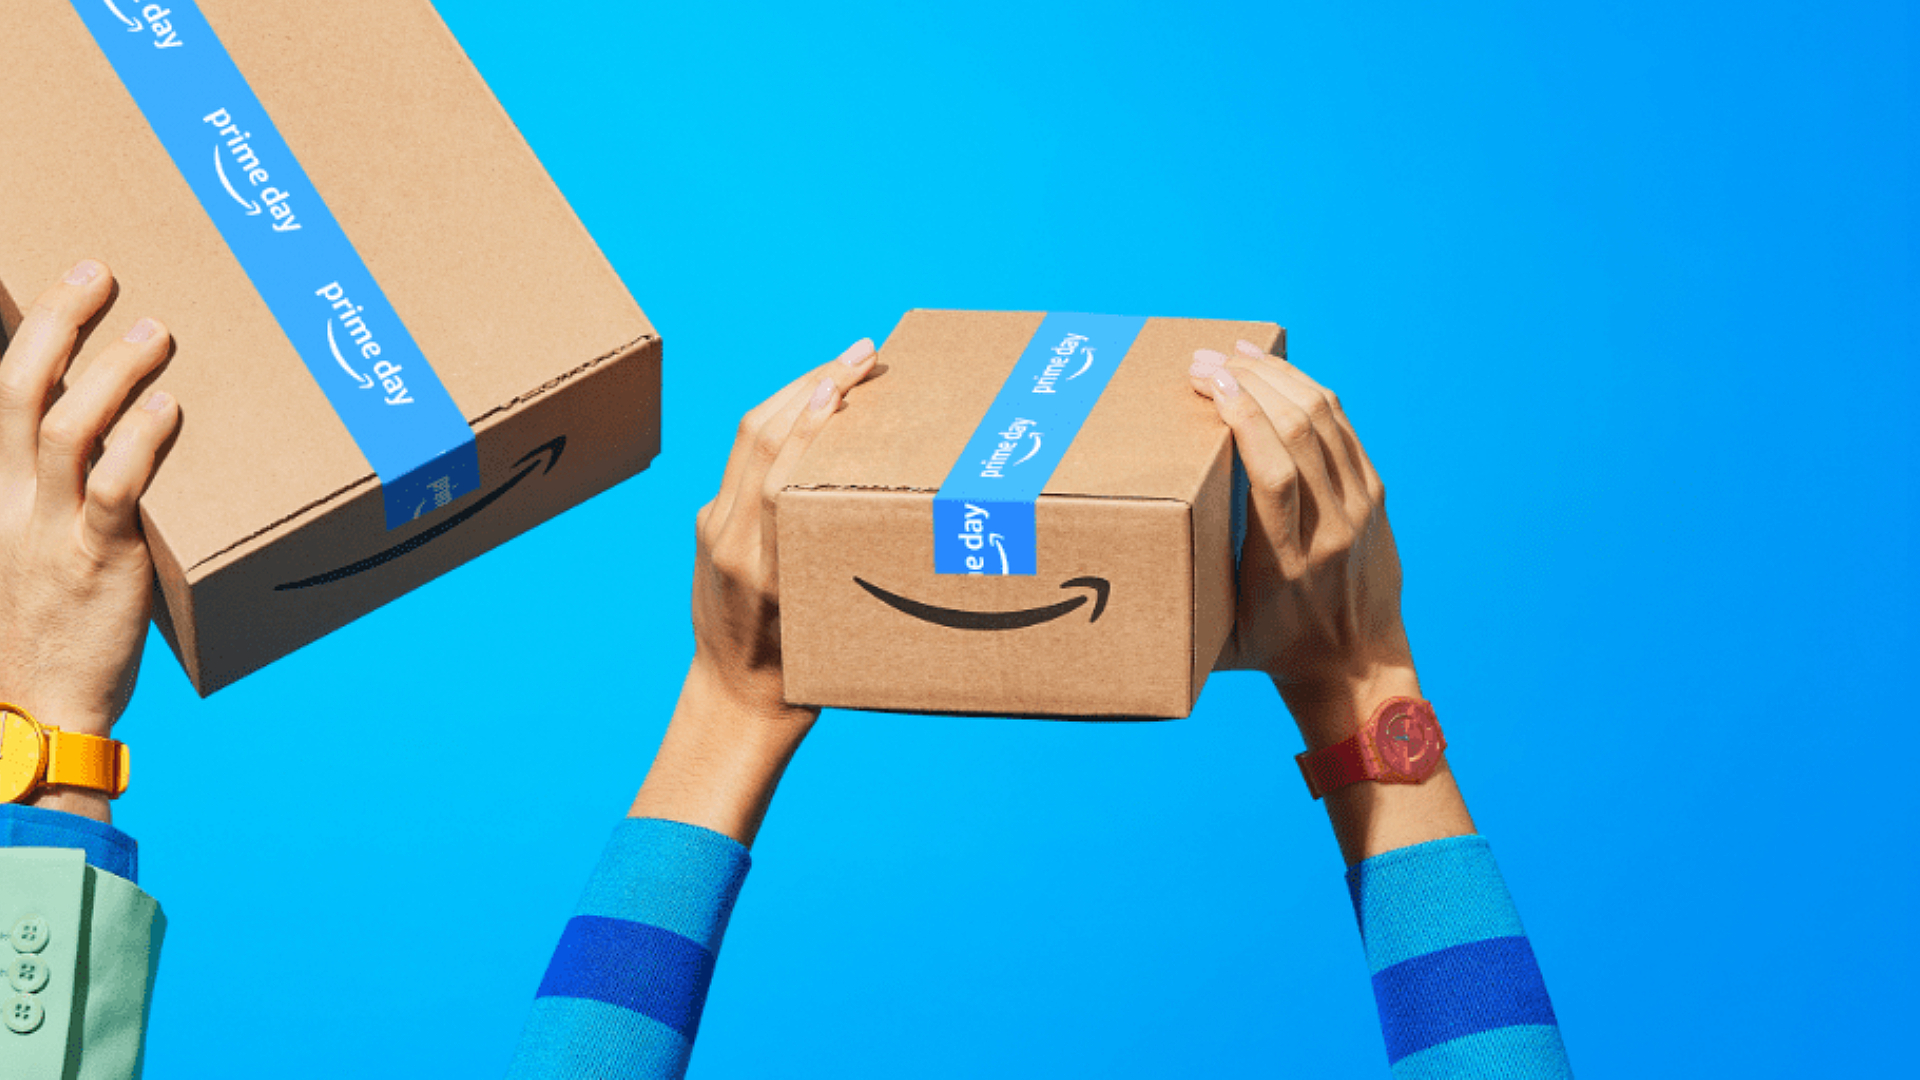 Amazon Prime is going up in price, so grab it before it does